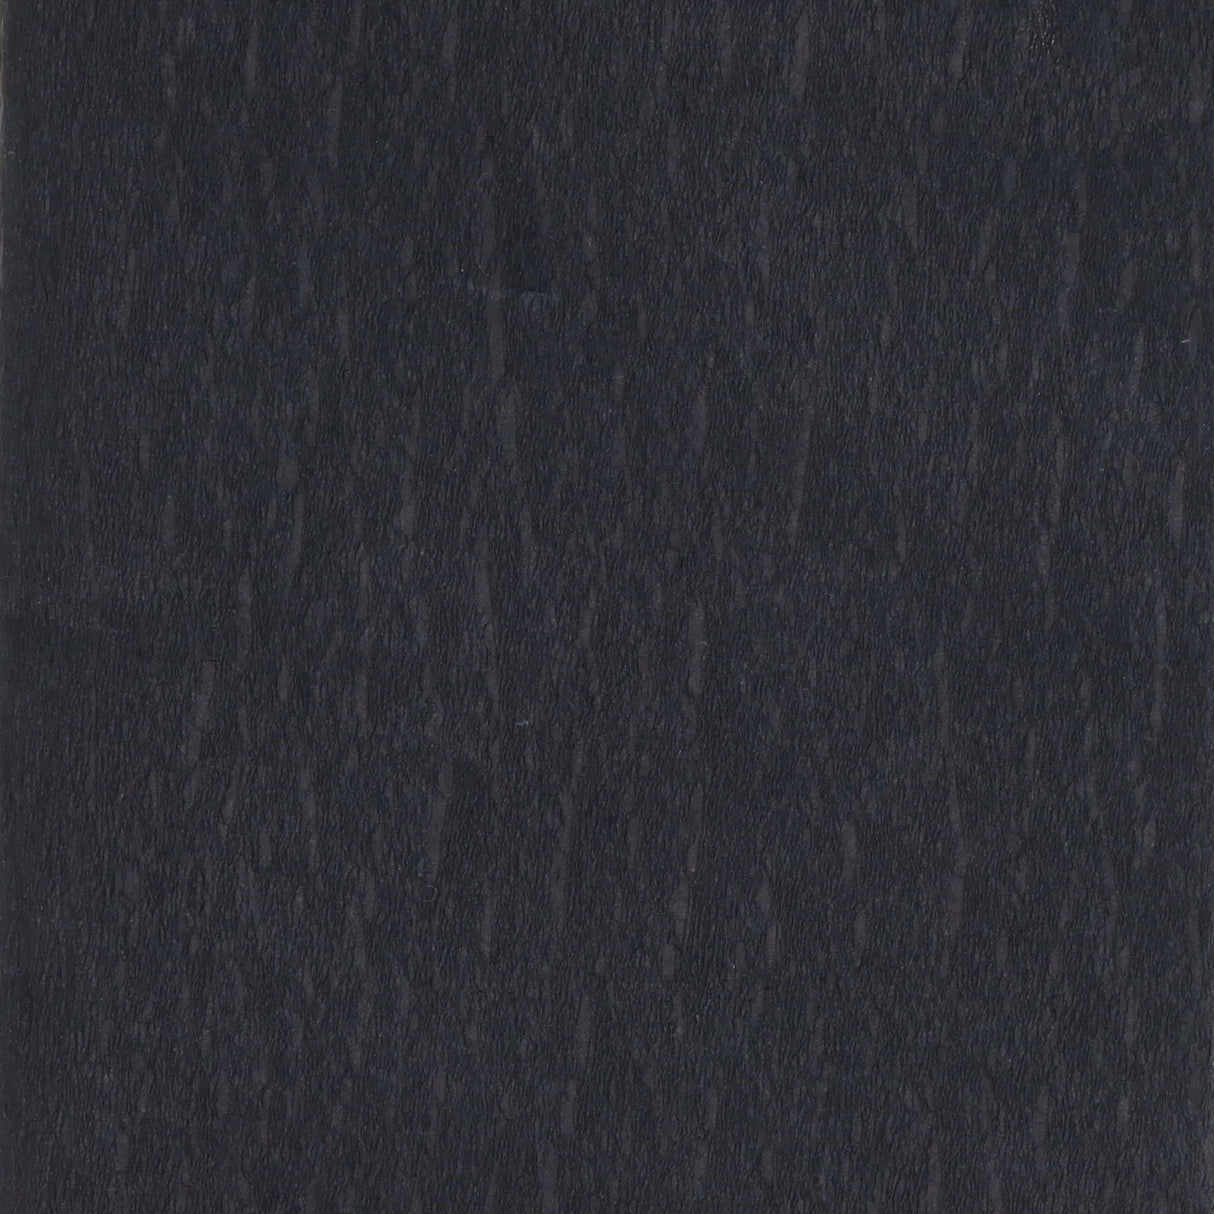 Icon Crepe Paper - 17gsm - 50cm x 250cm - Black-Crepe Paper-Icon | Buy Online at Stationery Shop